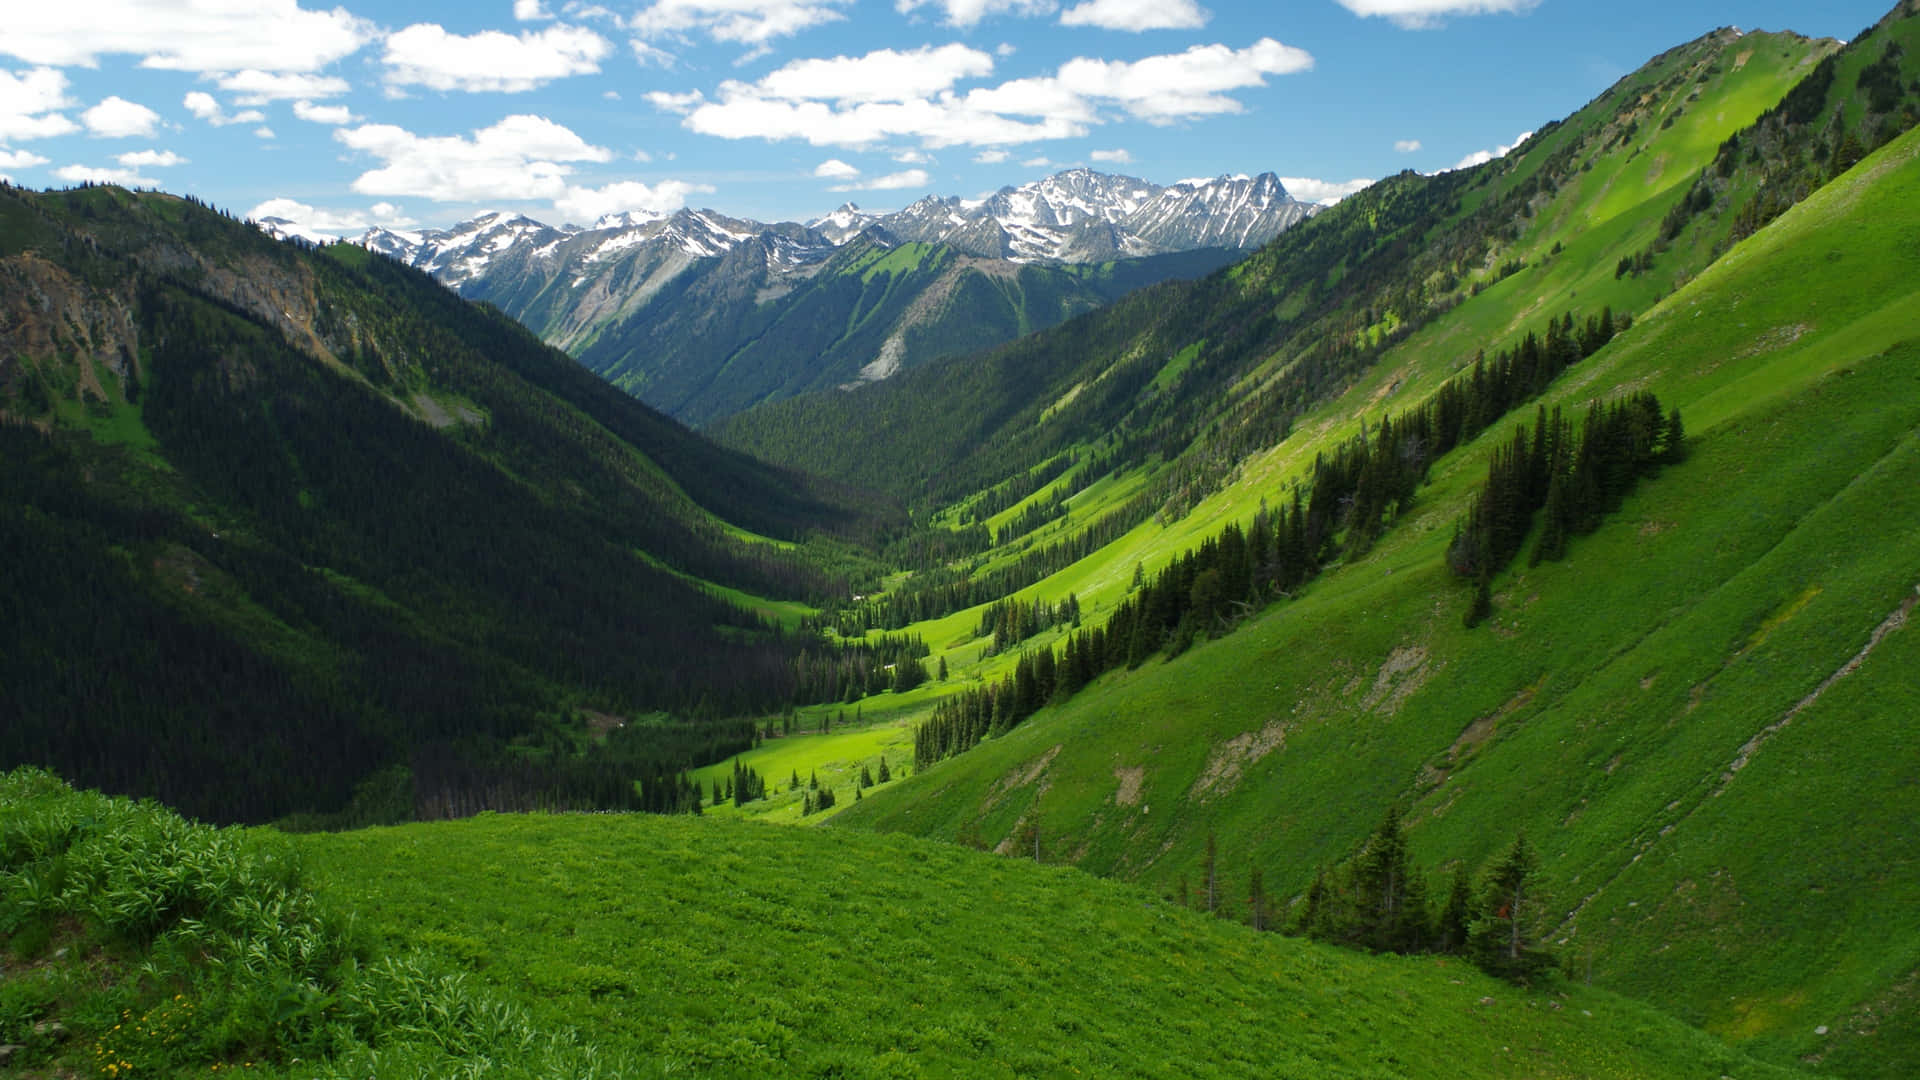 Take in the beauty of the picturesque mountain valley."